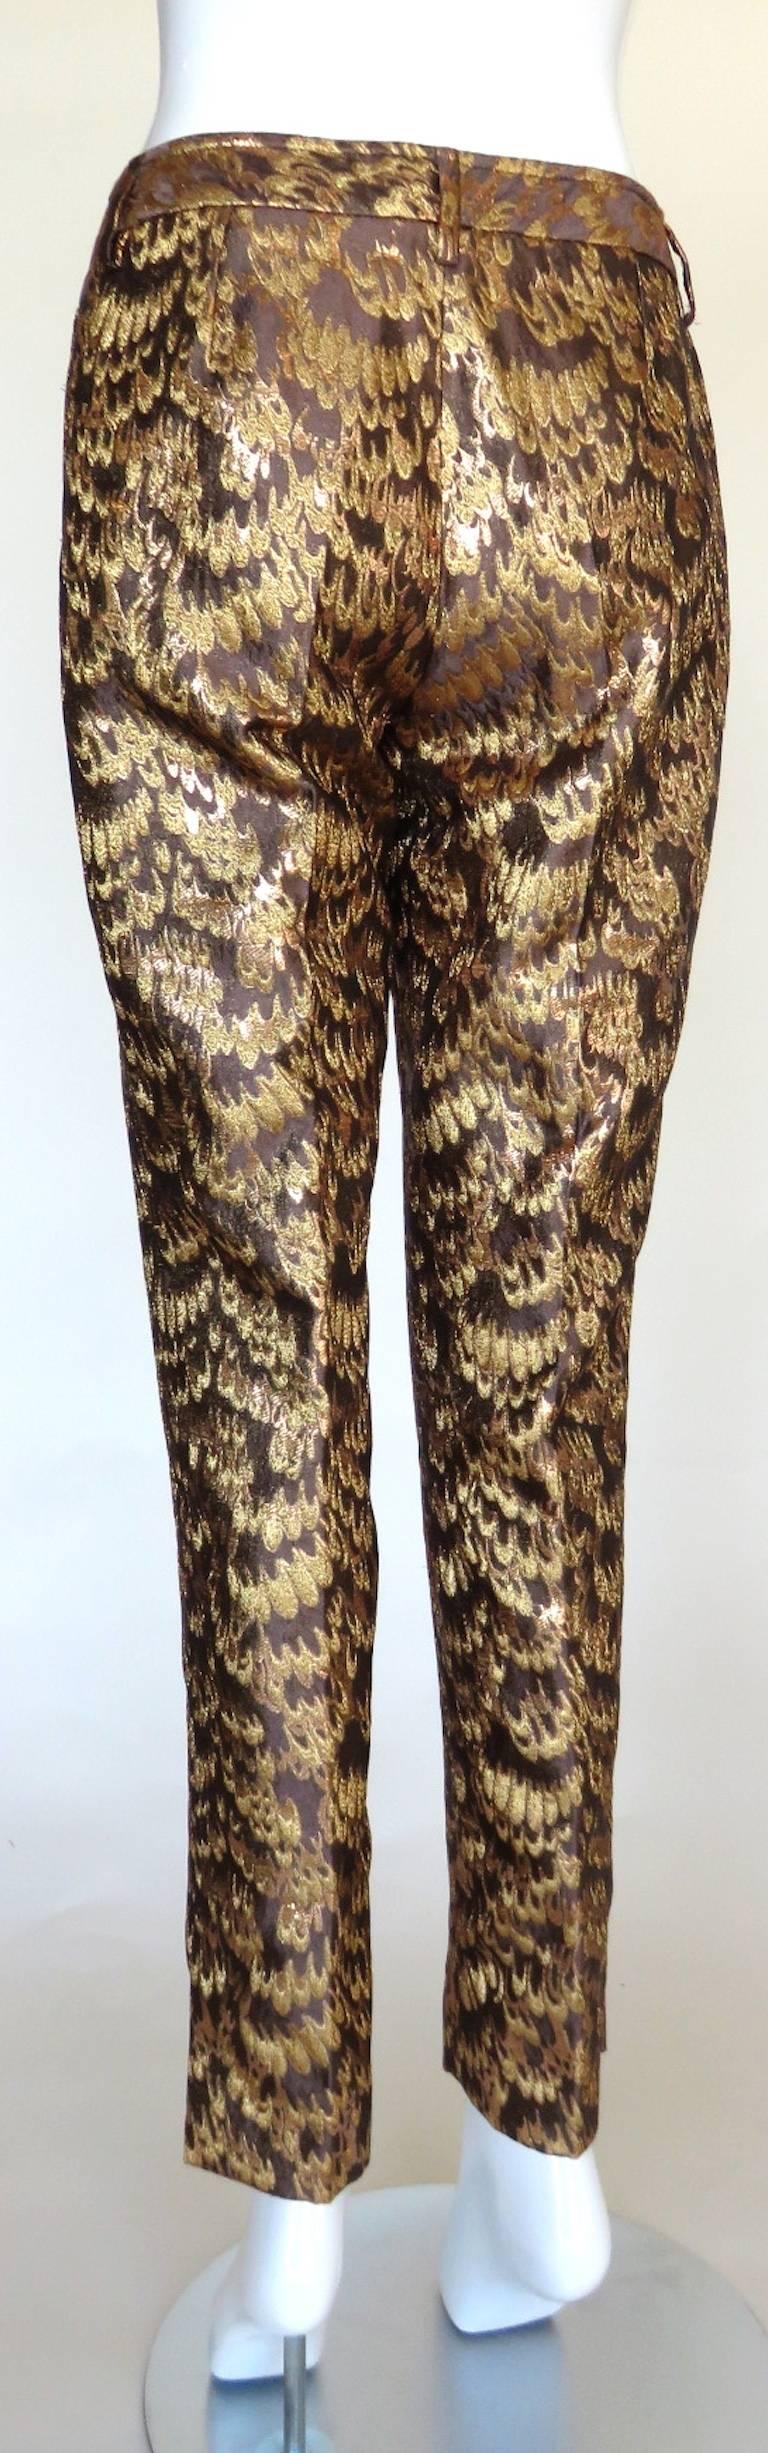 DOLCE & GABBANA Golden brocade feather jacquard pants In Excellent Condition For Sale In Newport Beach, CA